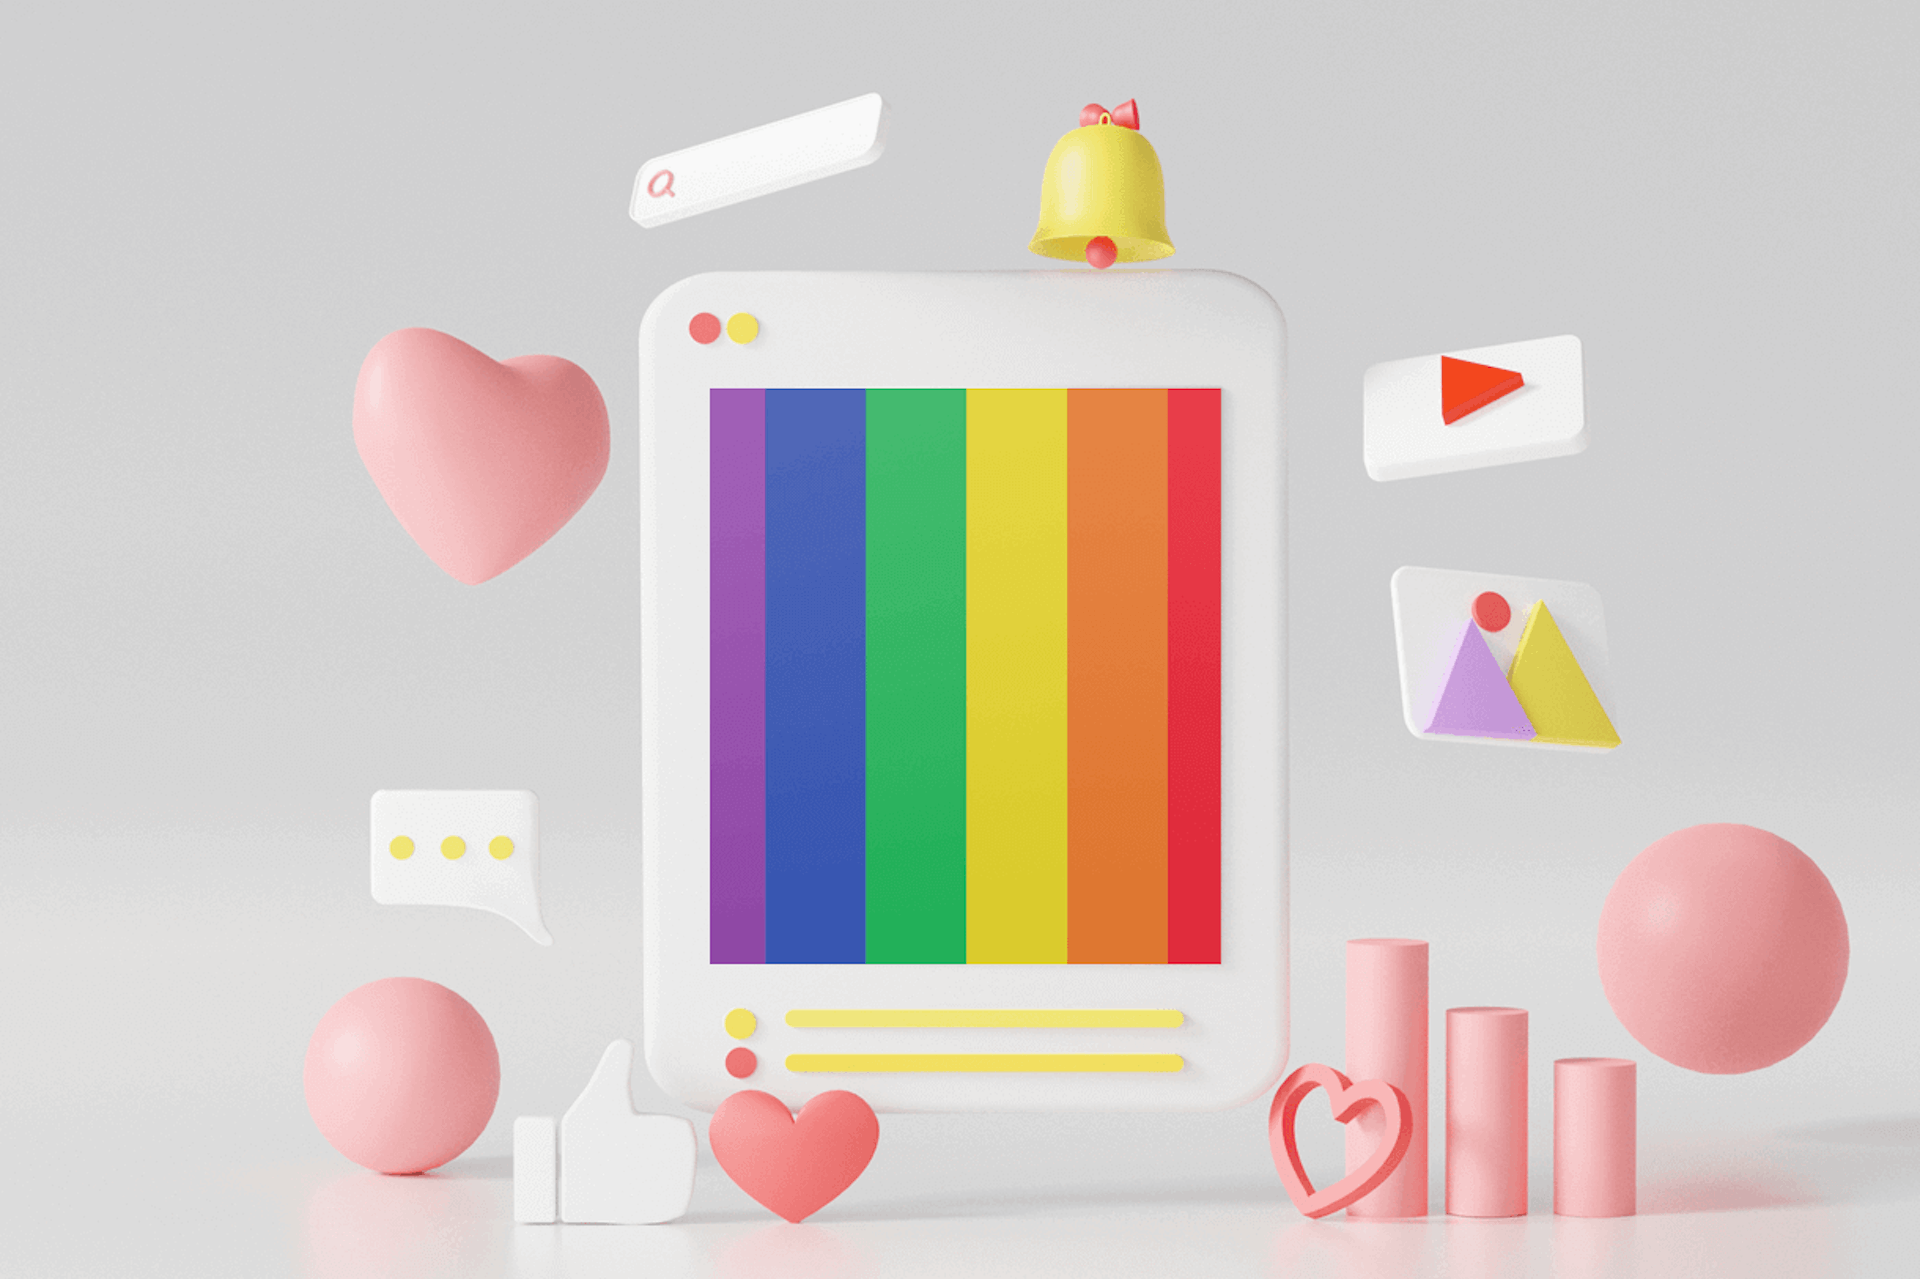 Surrounded by pink hearts and spheres, a rainbow appears on a tablet screen for a blog about LGBTQ+ representation in marketing and advertising.